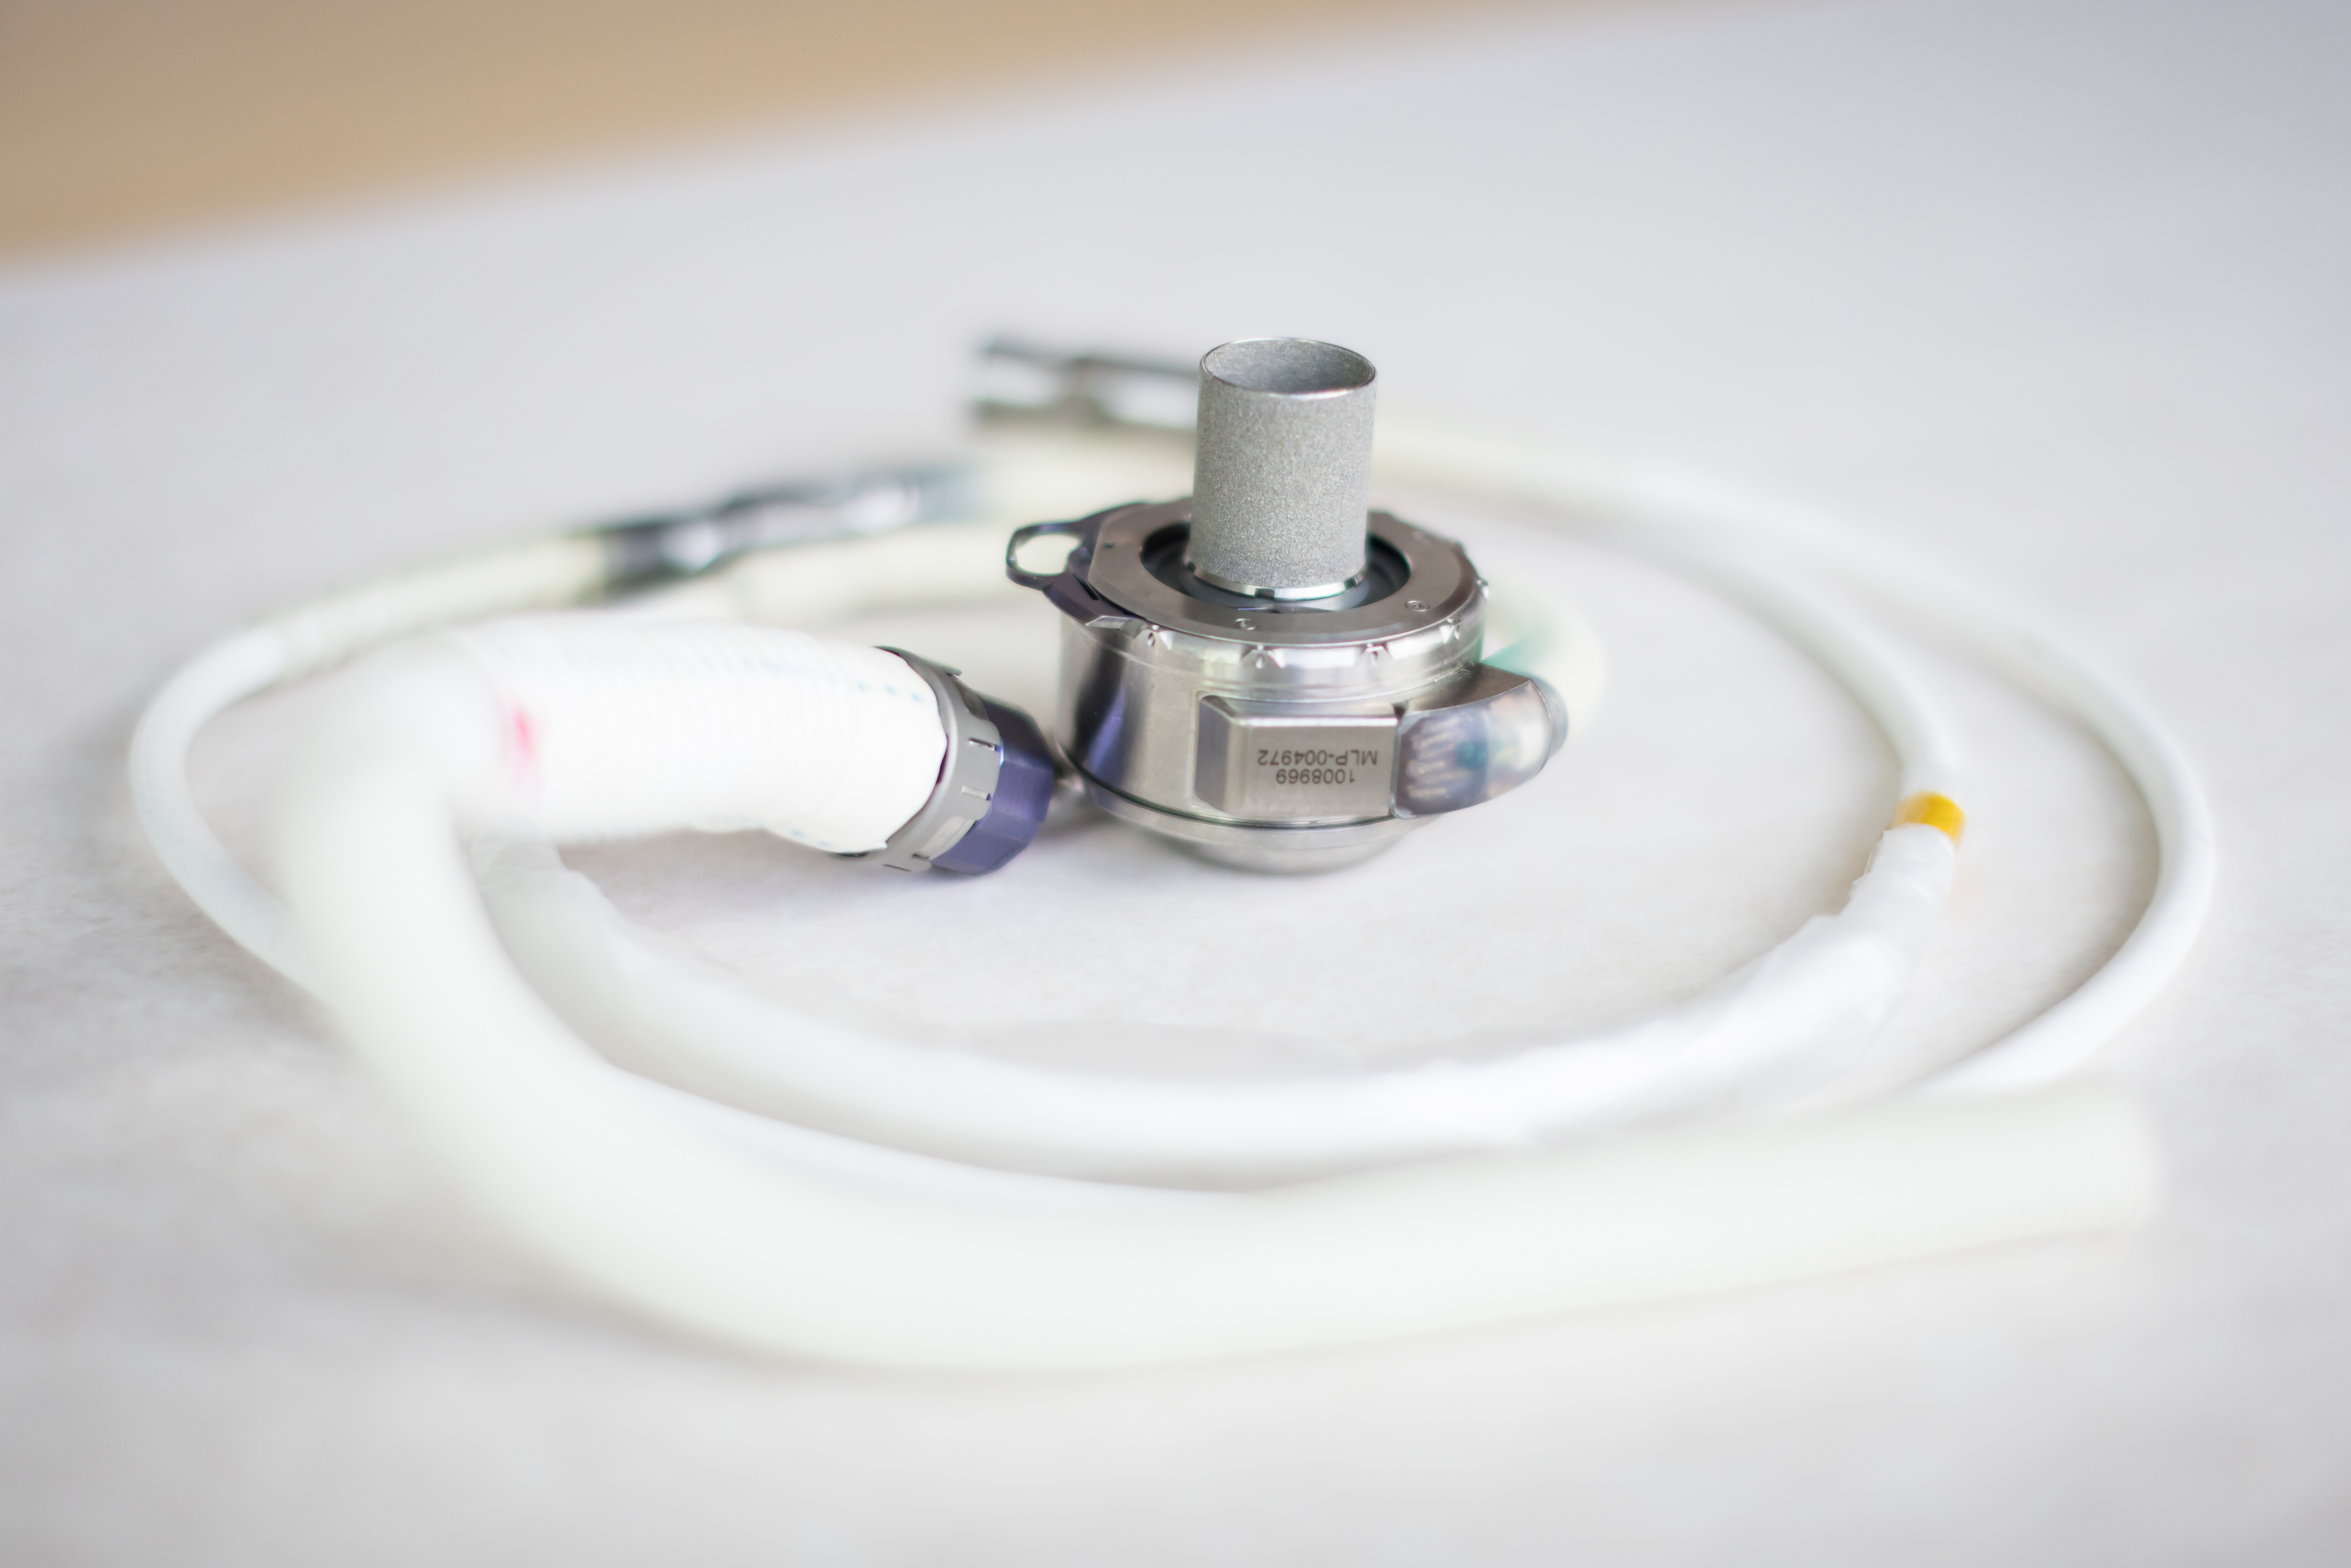 Close-up photo of a heart pump made of plastic tubing and metal, sitting on a white surface.